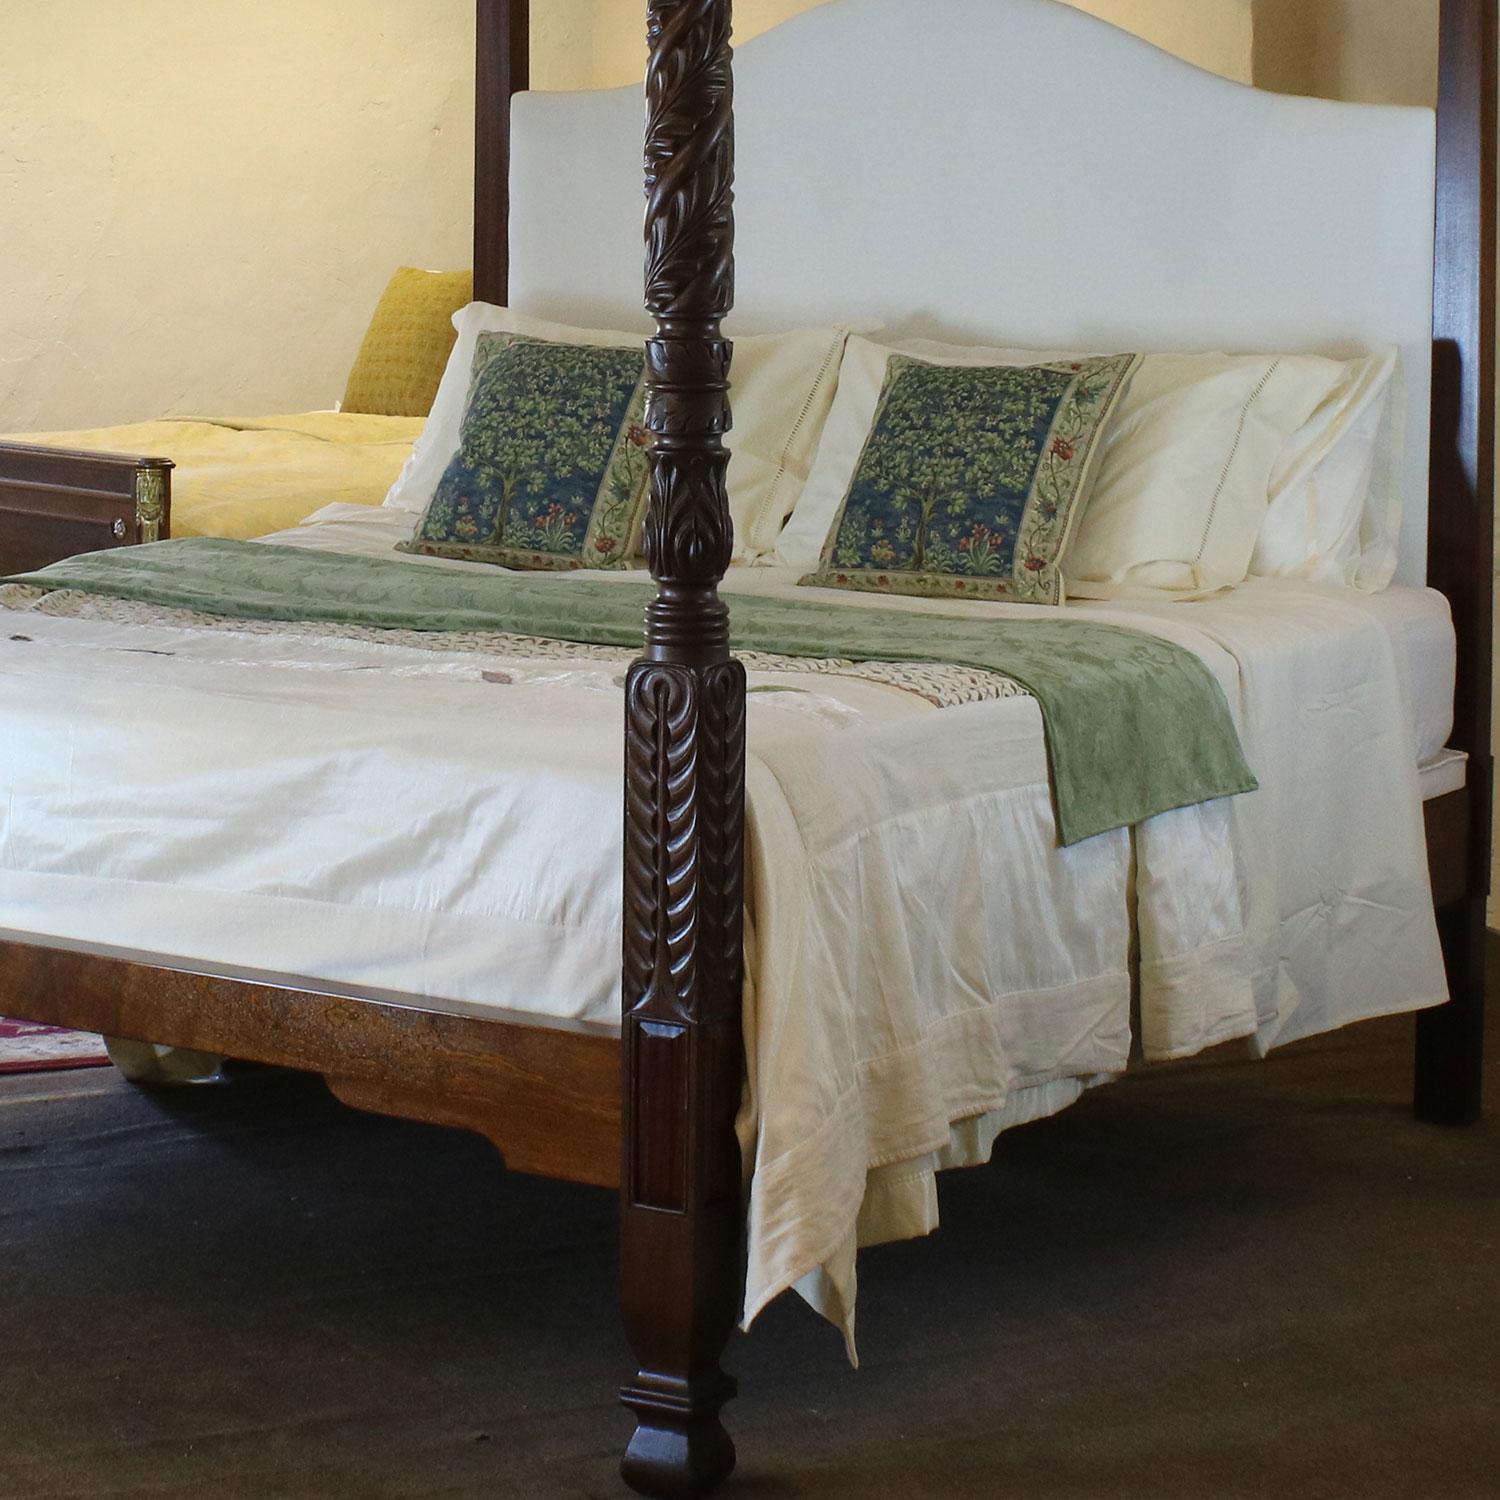 A reconstructed four-poster bed using original antique mahogany decorative Victorian front posts.

This magnificent four poster bed has been reconstructed around Victorian mahogany front posts. 

This bed is 72